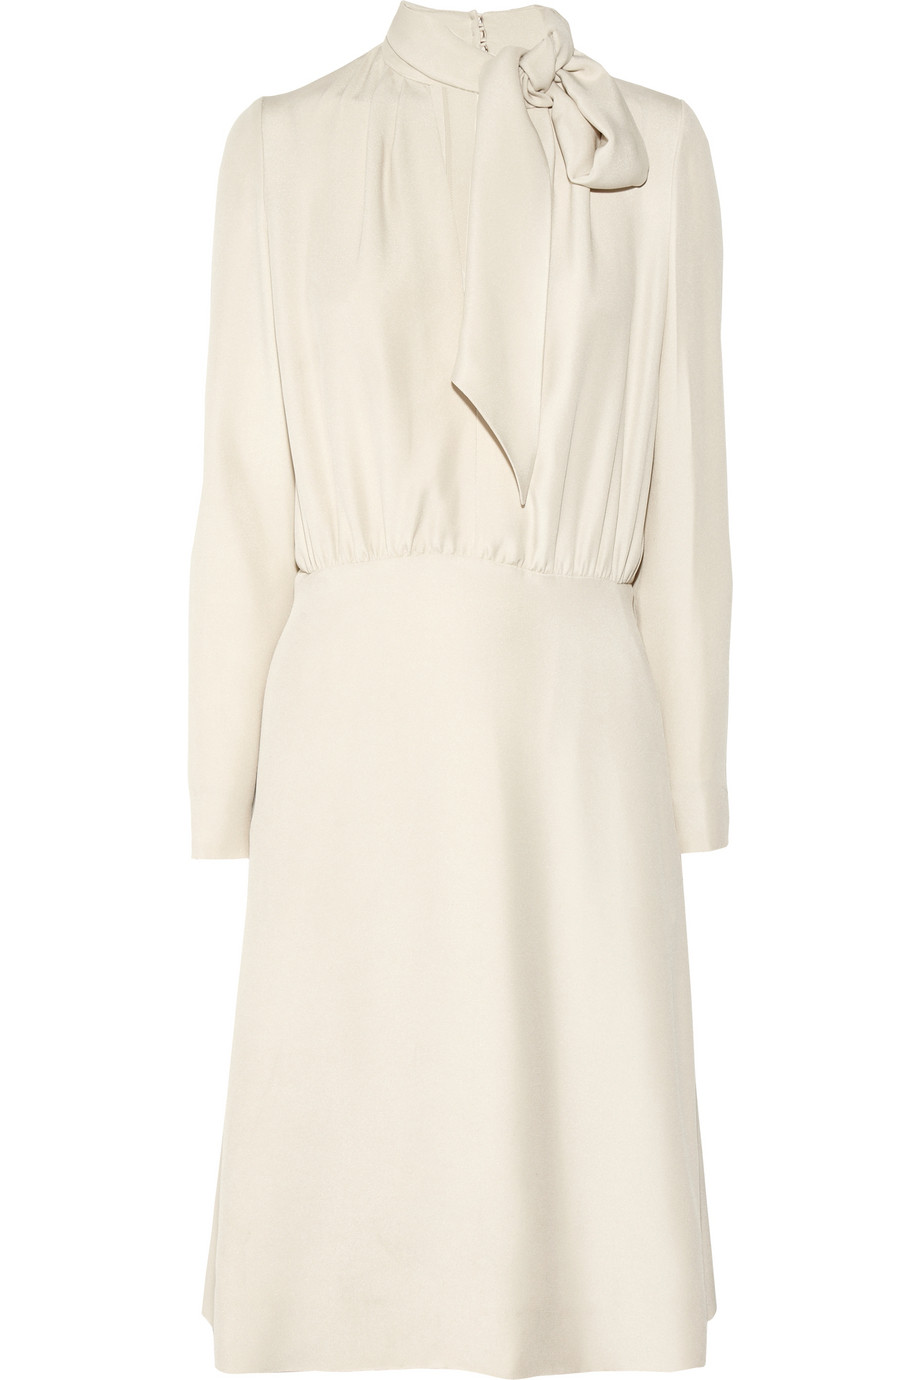 Lyst - Chloé Pussy-Bow Crepe Dress in White